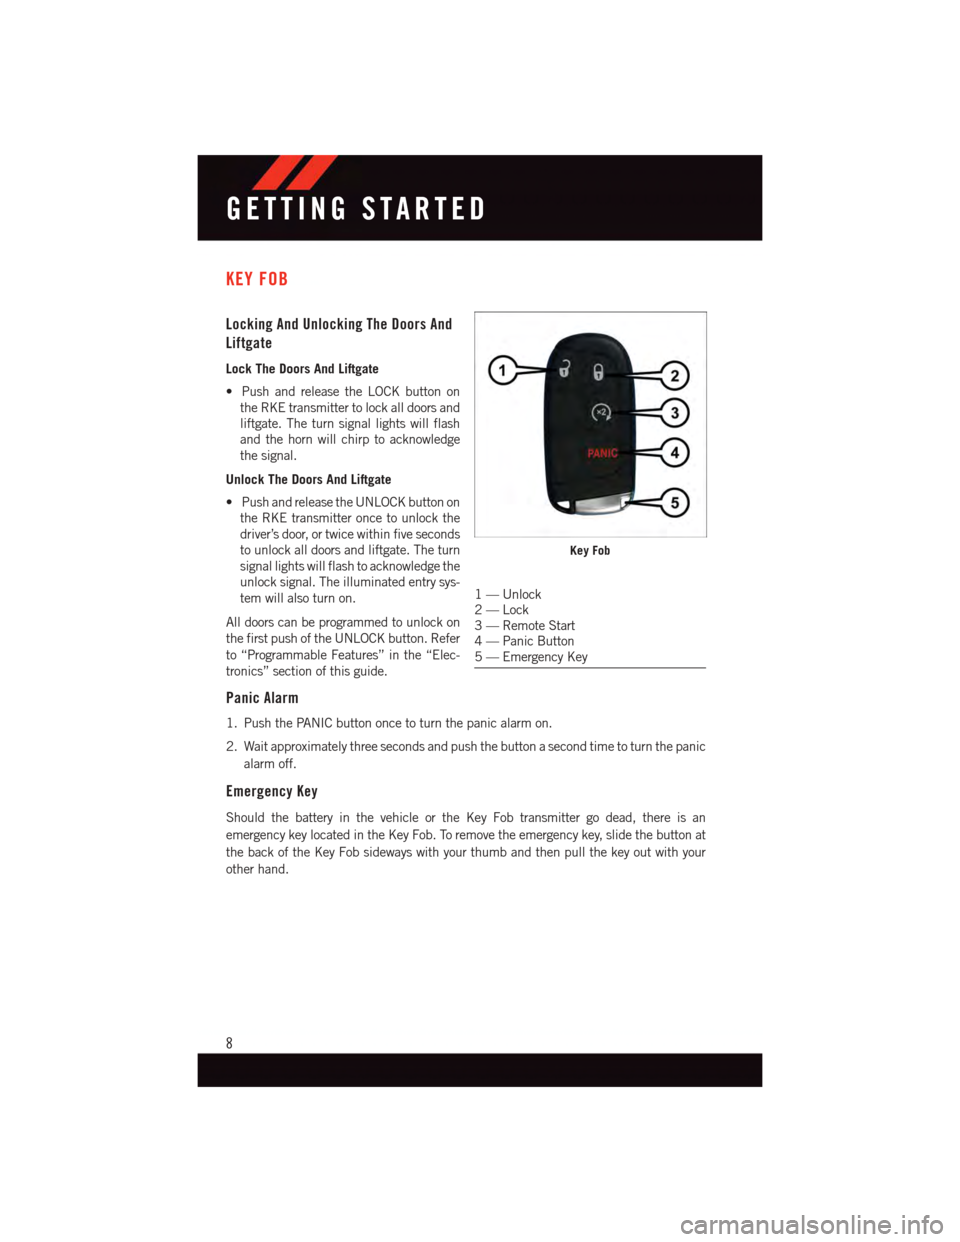 DODGE JOURNEY 2015 1.G User Guide KEY FOB
Locking And Unlocking The Doors And
Liftgate
Lock The Doors And Liftgate
•PushandreleasetheLOCKbuttonon
the RKE transmitter to lock all doors and
liftgate. The turn signal lights will flash
